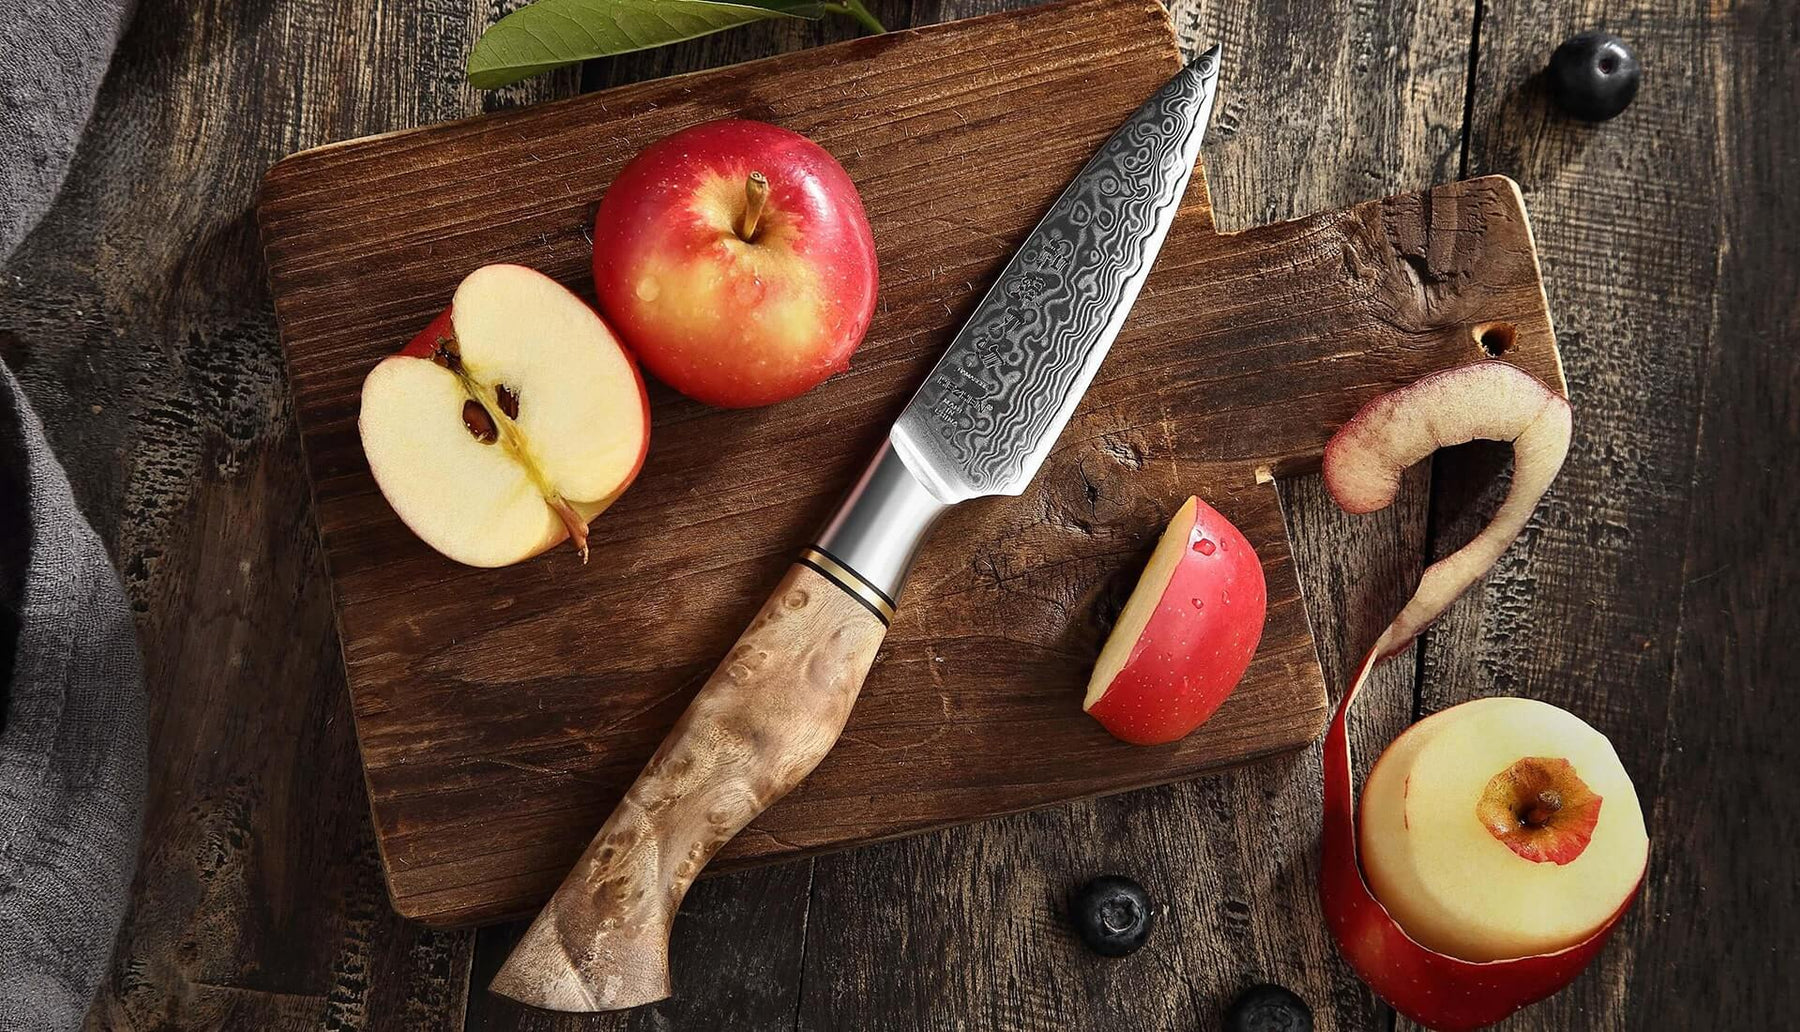 What Is A Paring Knife And How Do You Use It?